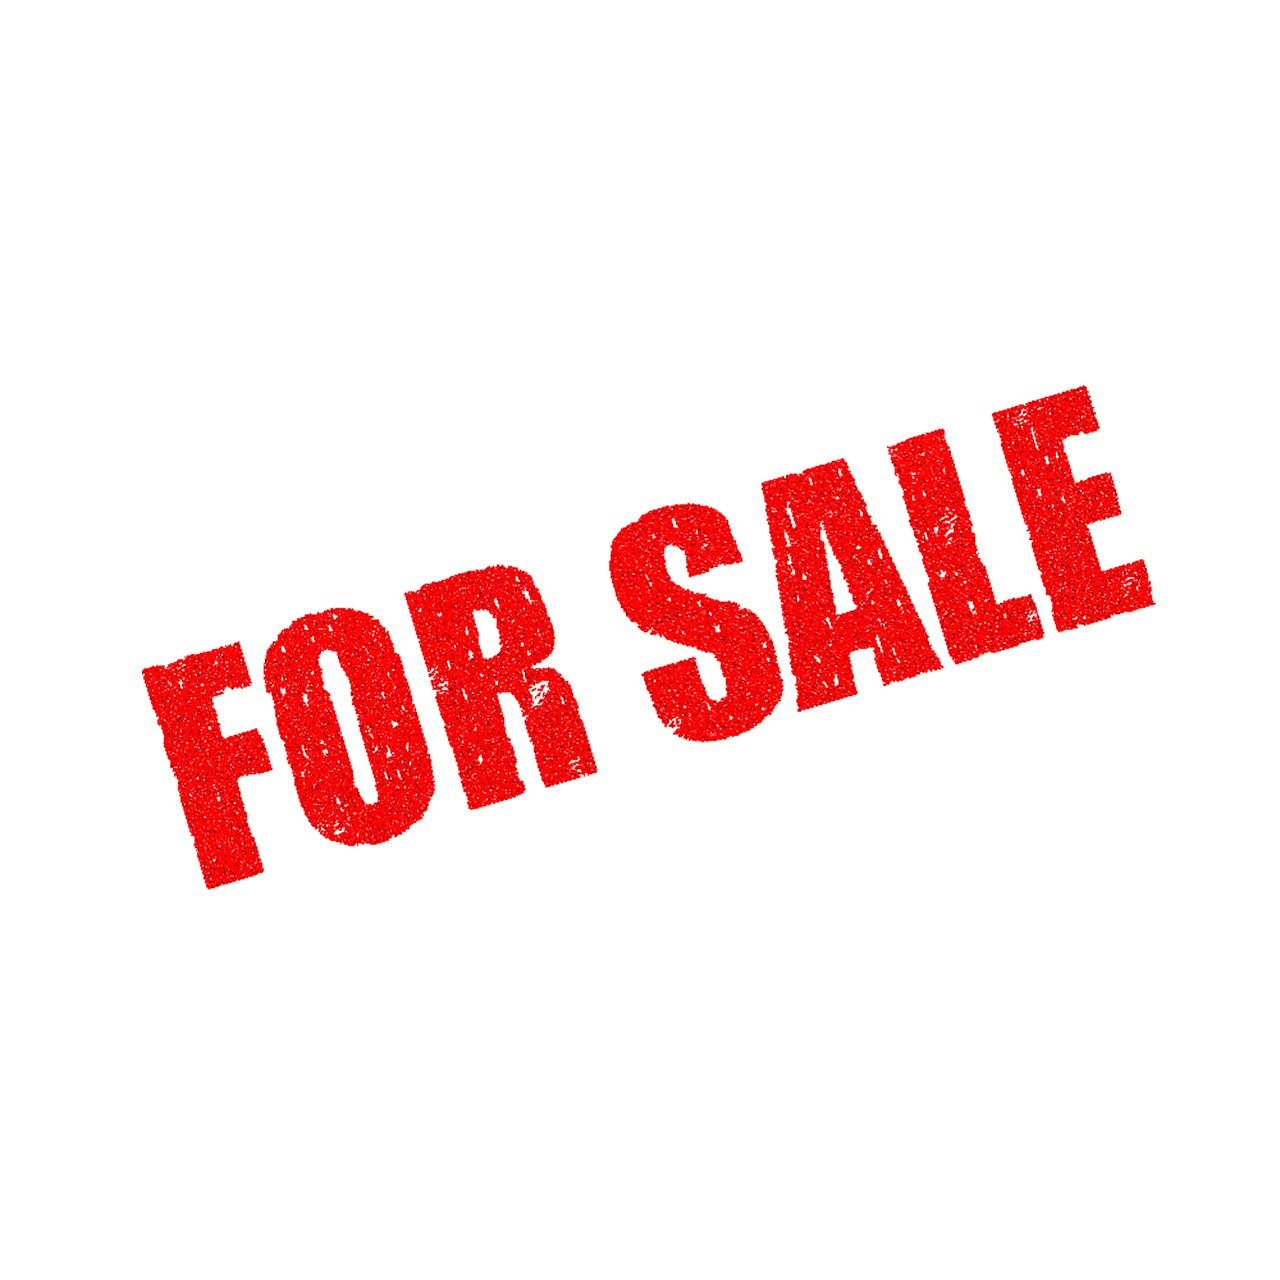 For Sale written in red capital letters on a white background